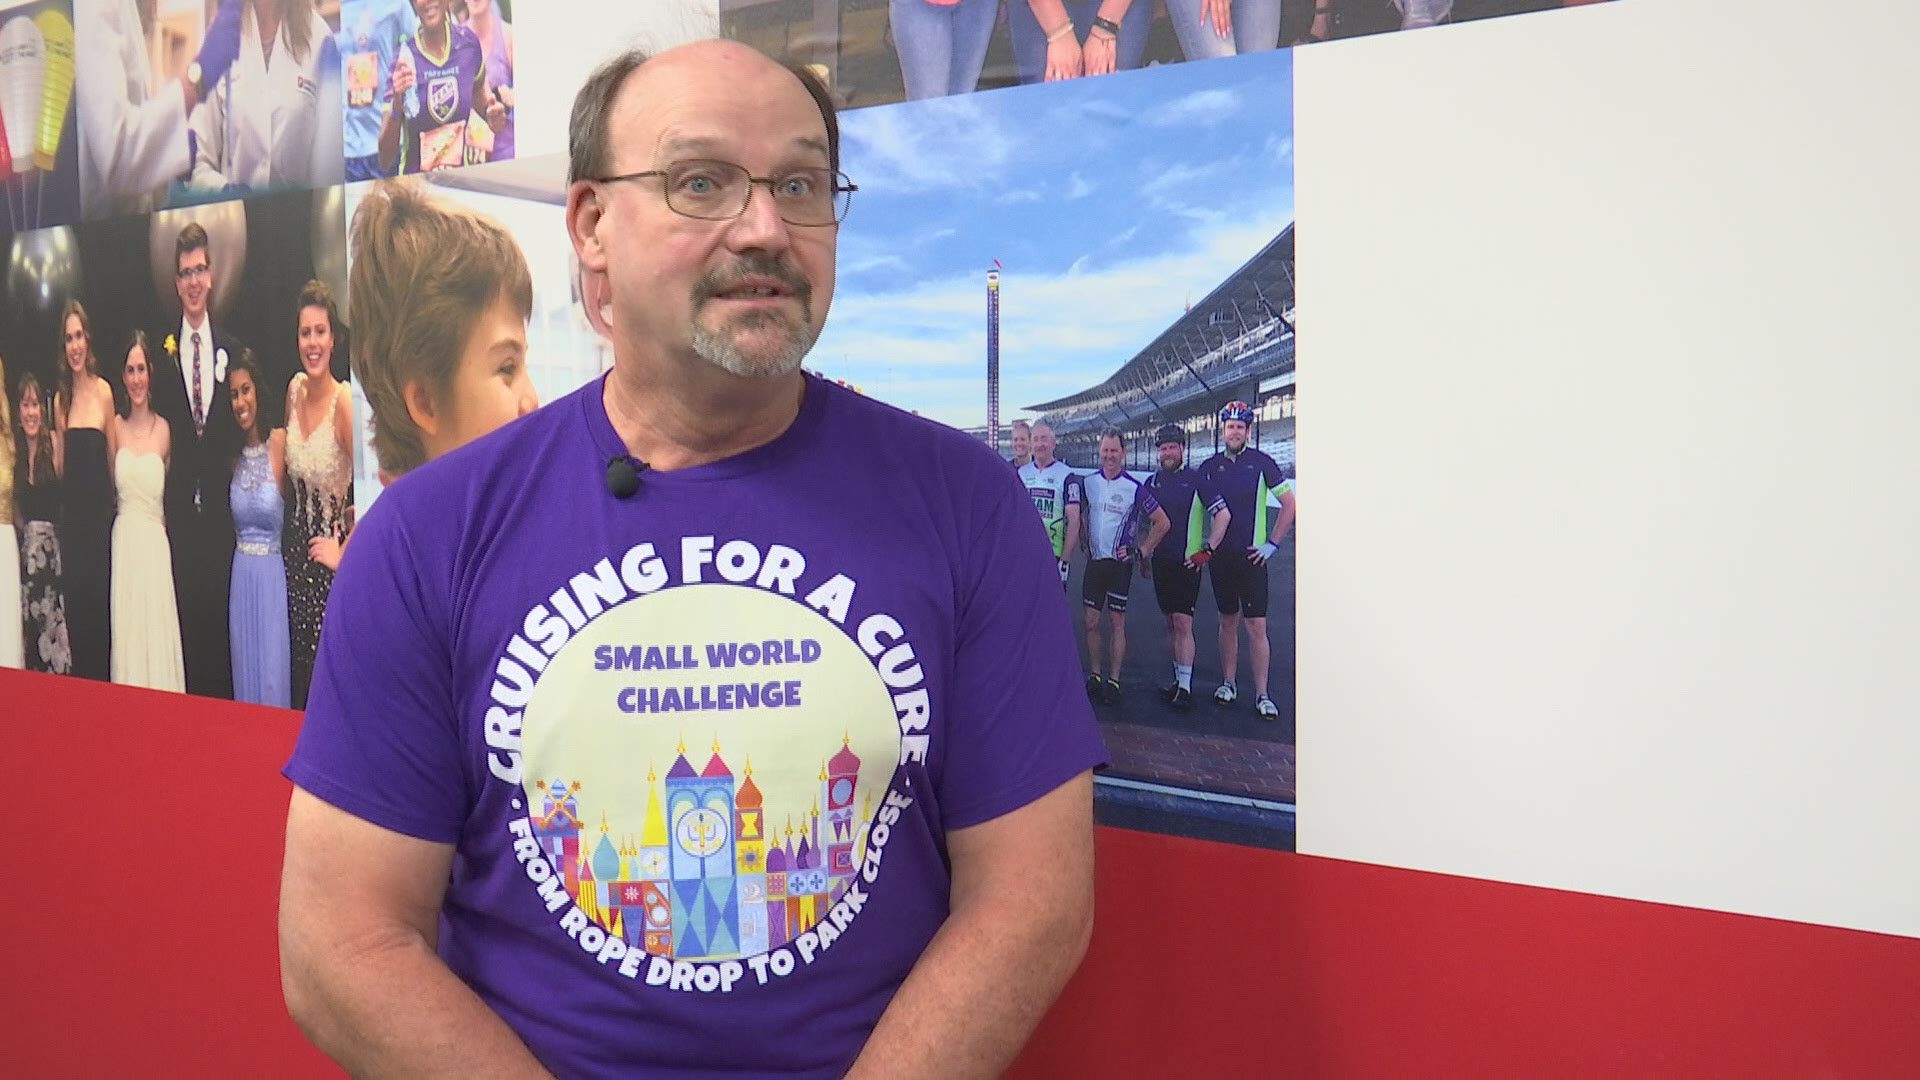 Doug Cross says while it's a lighthearted fundraiser, it's for an important cause. He and his group of fellow riders make up a "Team in Training" and are raising money for the Leukemia & Lymphoma Society.